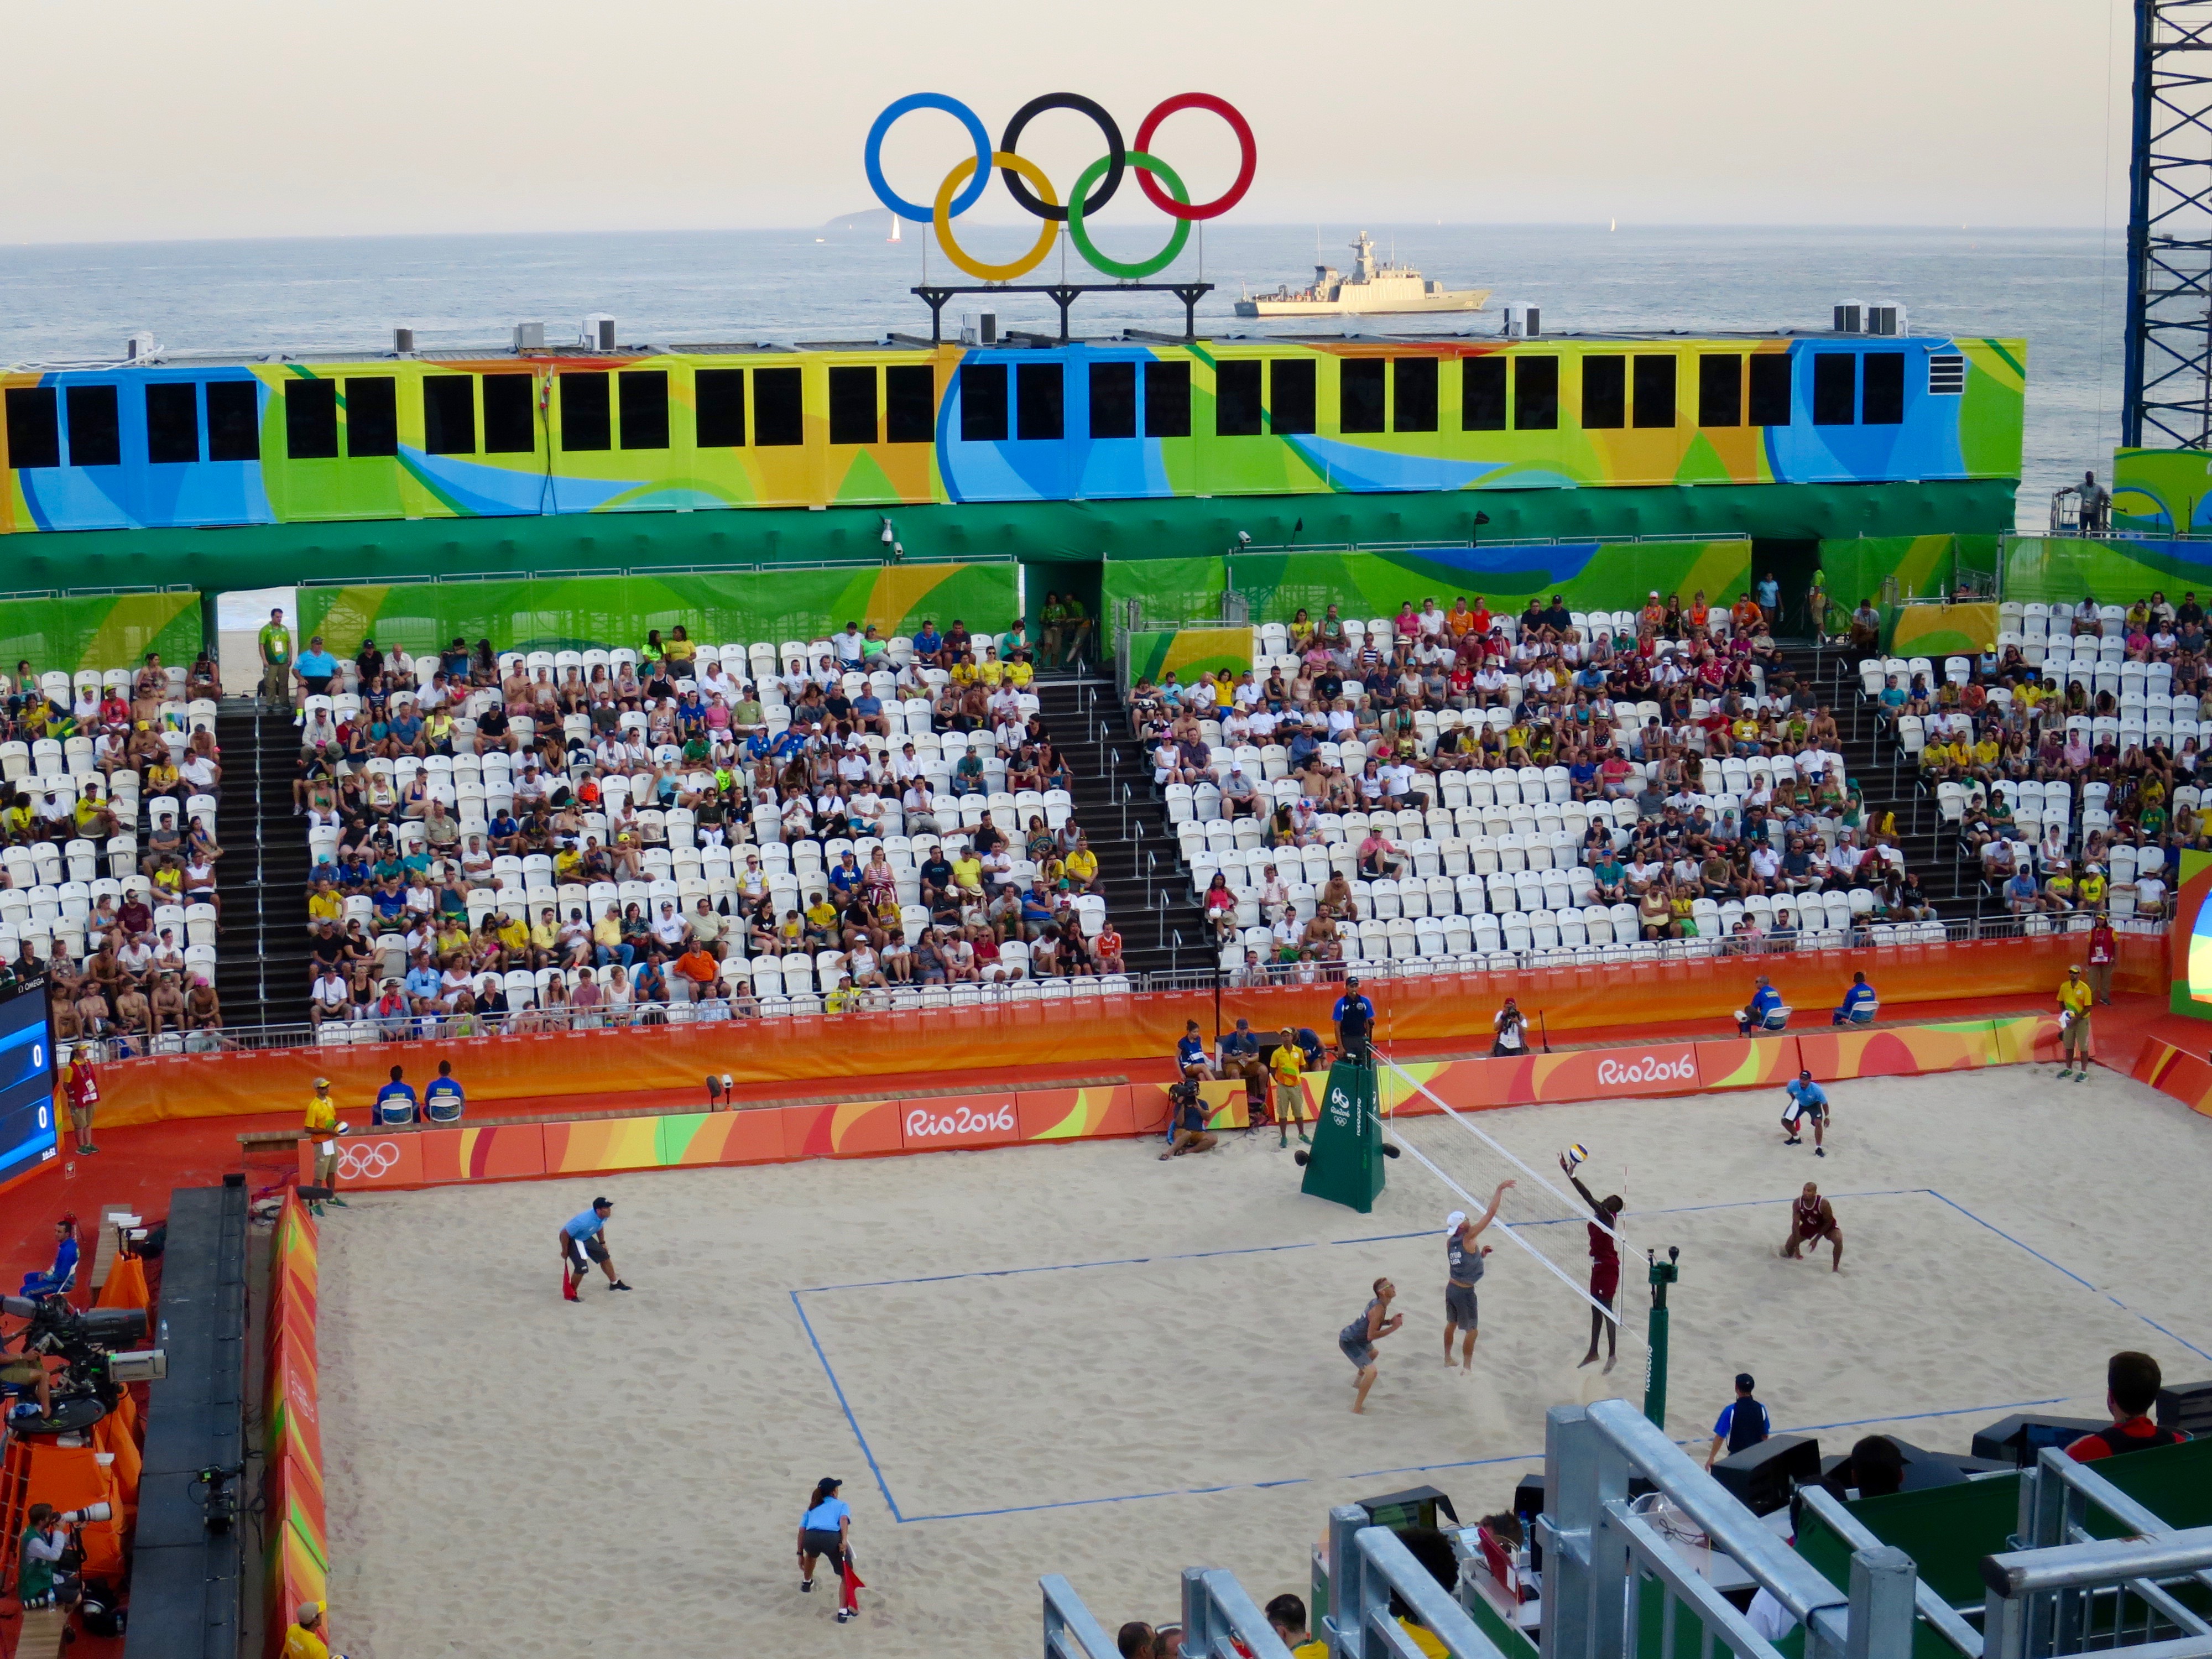 Beach Volleyball Arena - BVA on Copacabana Beach with a defender ship patrolling the area.